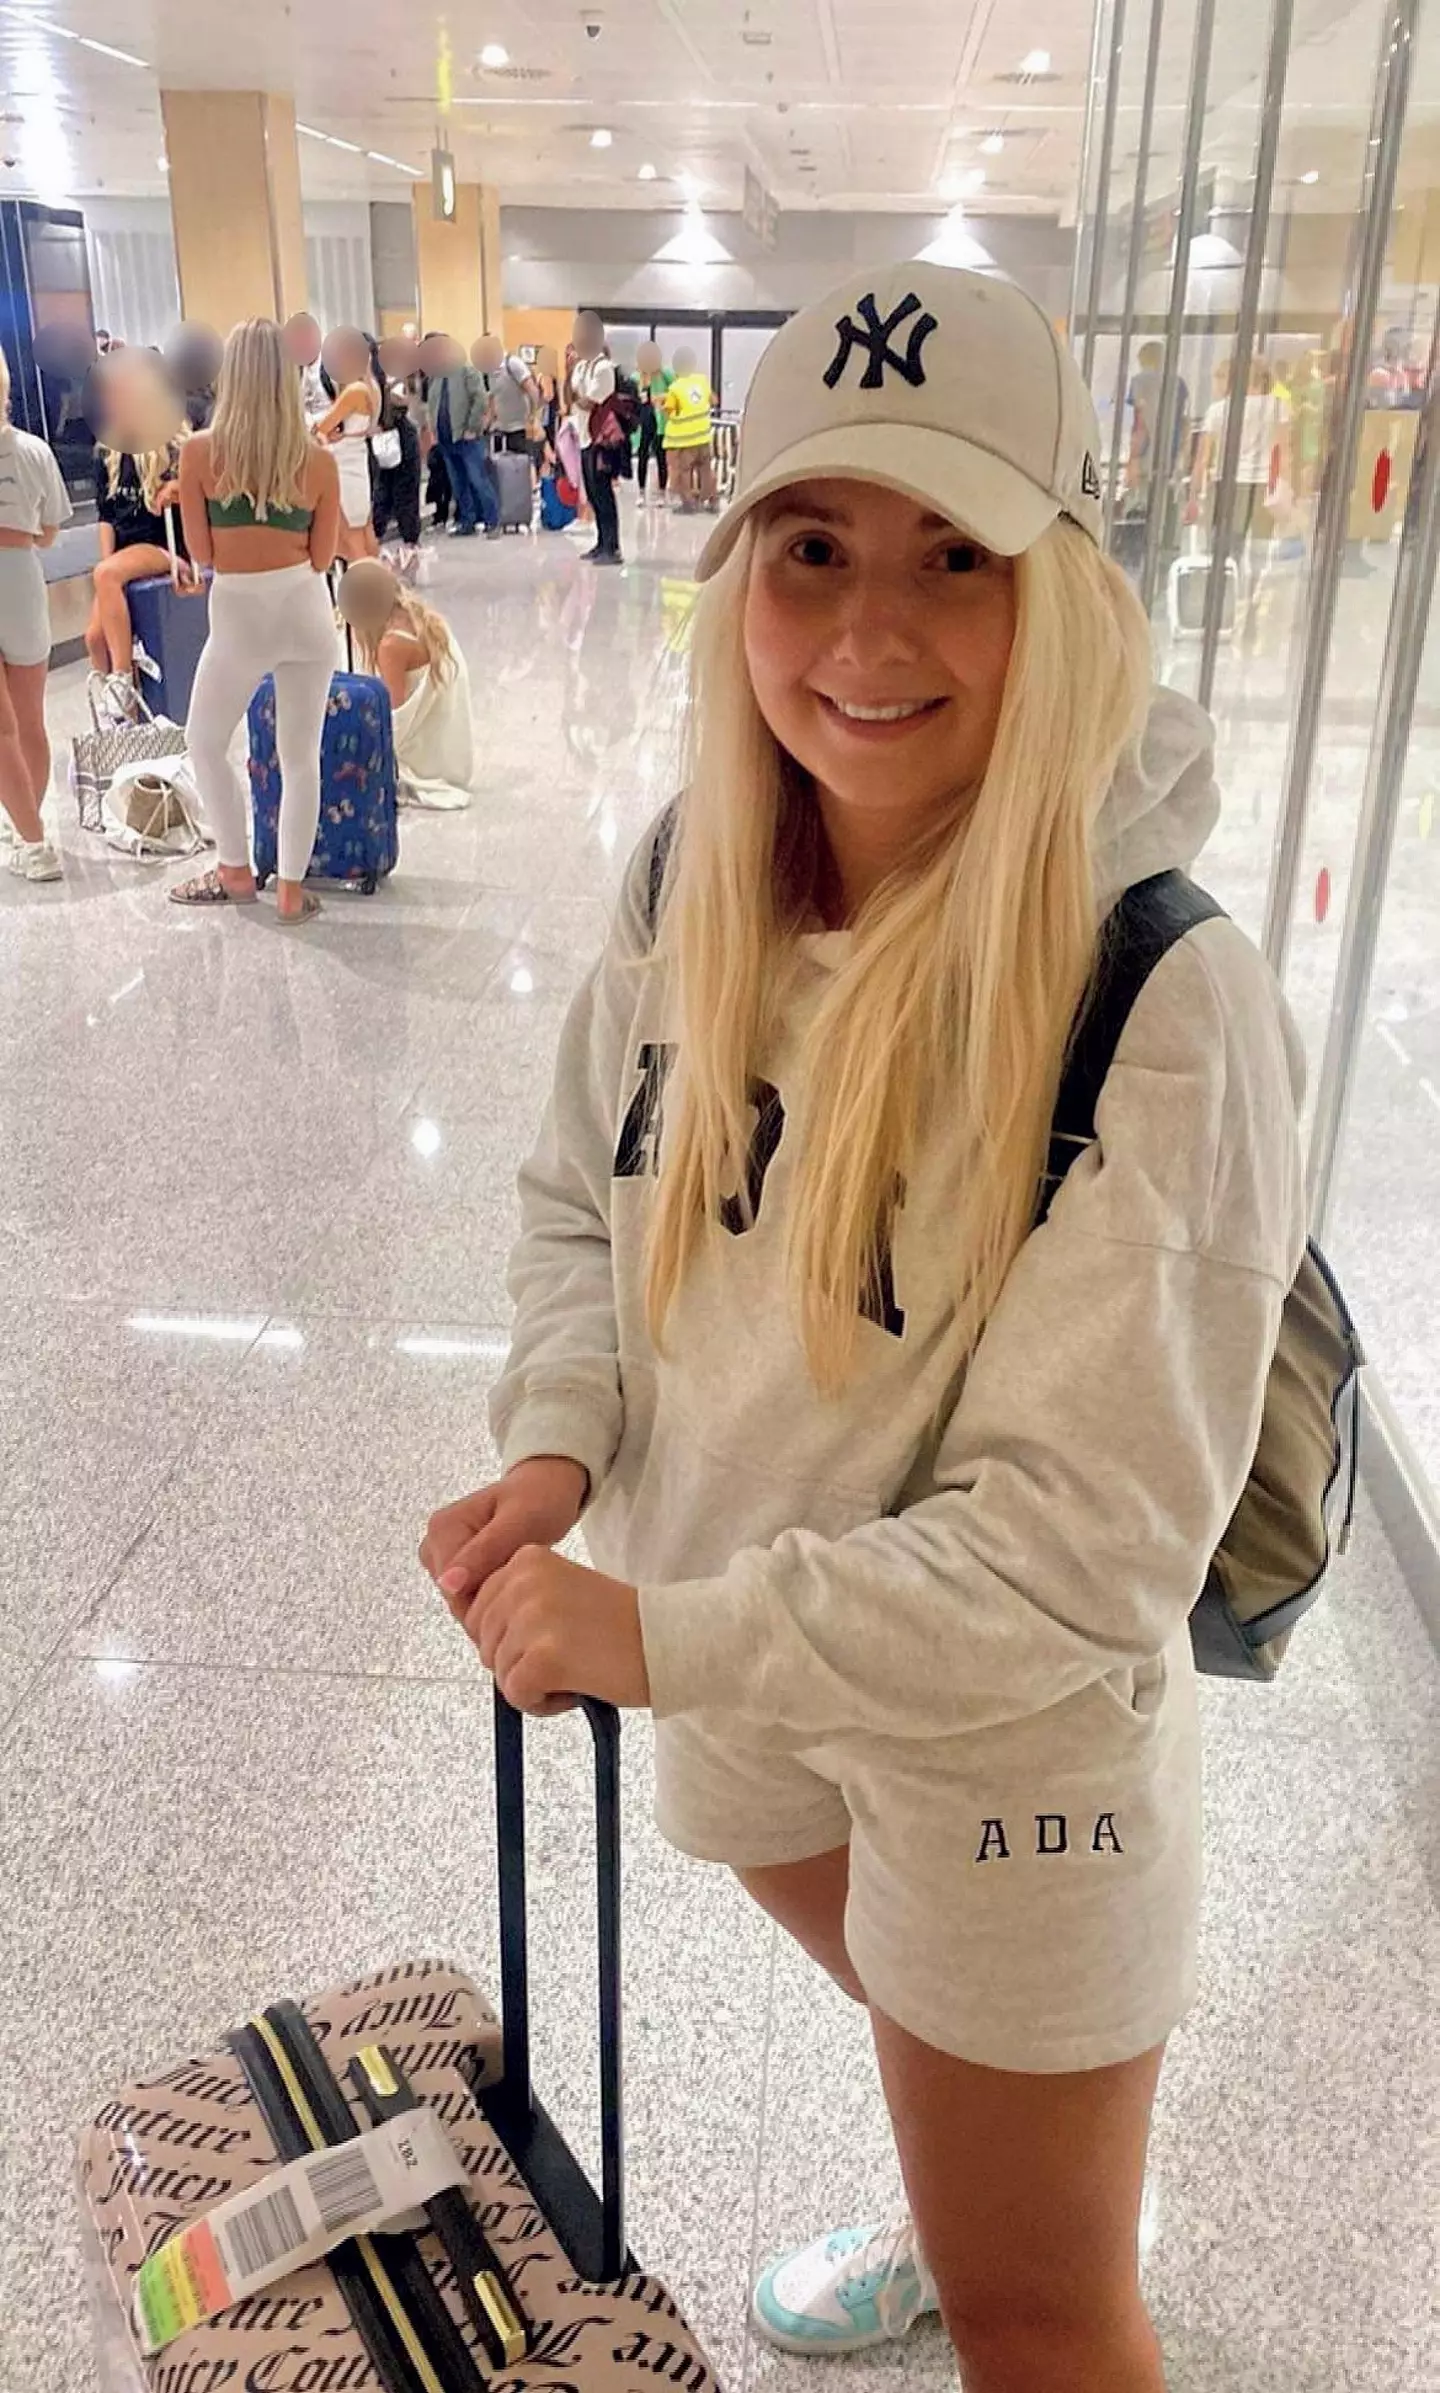 Chloe Fitzpatrick, 24, claimed she was 'discriminated' against by the airline due to her life-threatening strawberry allergy.